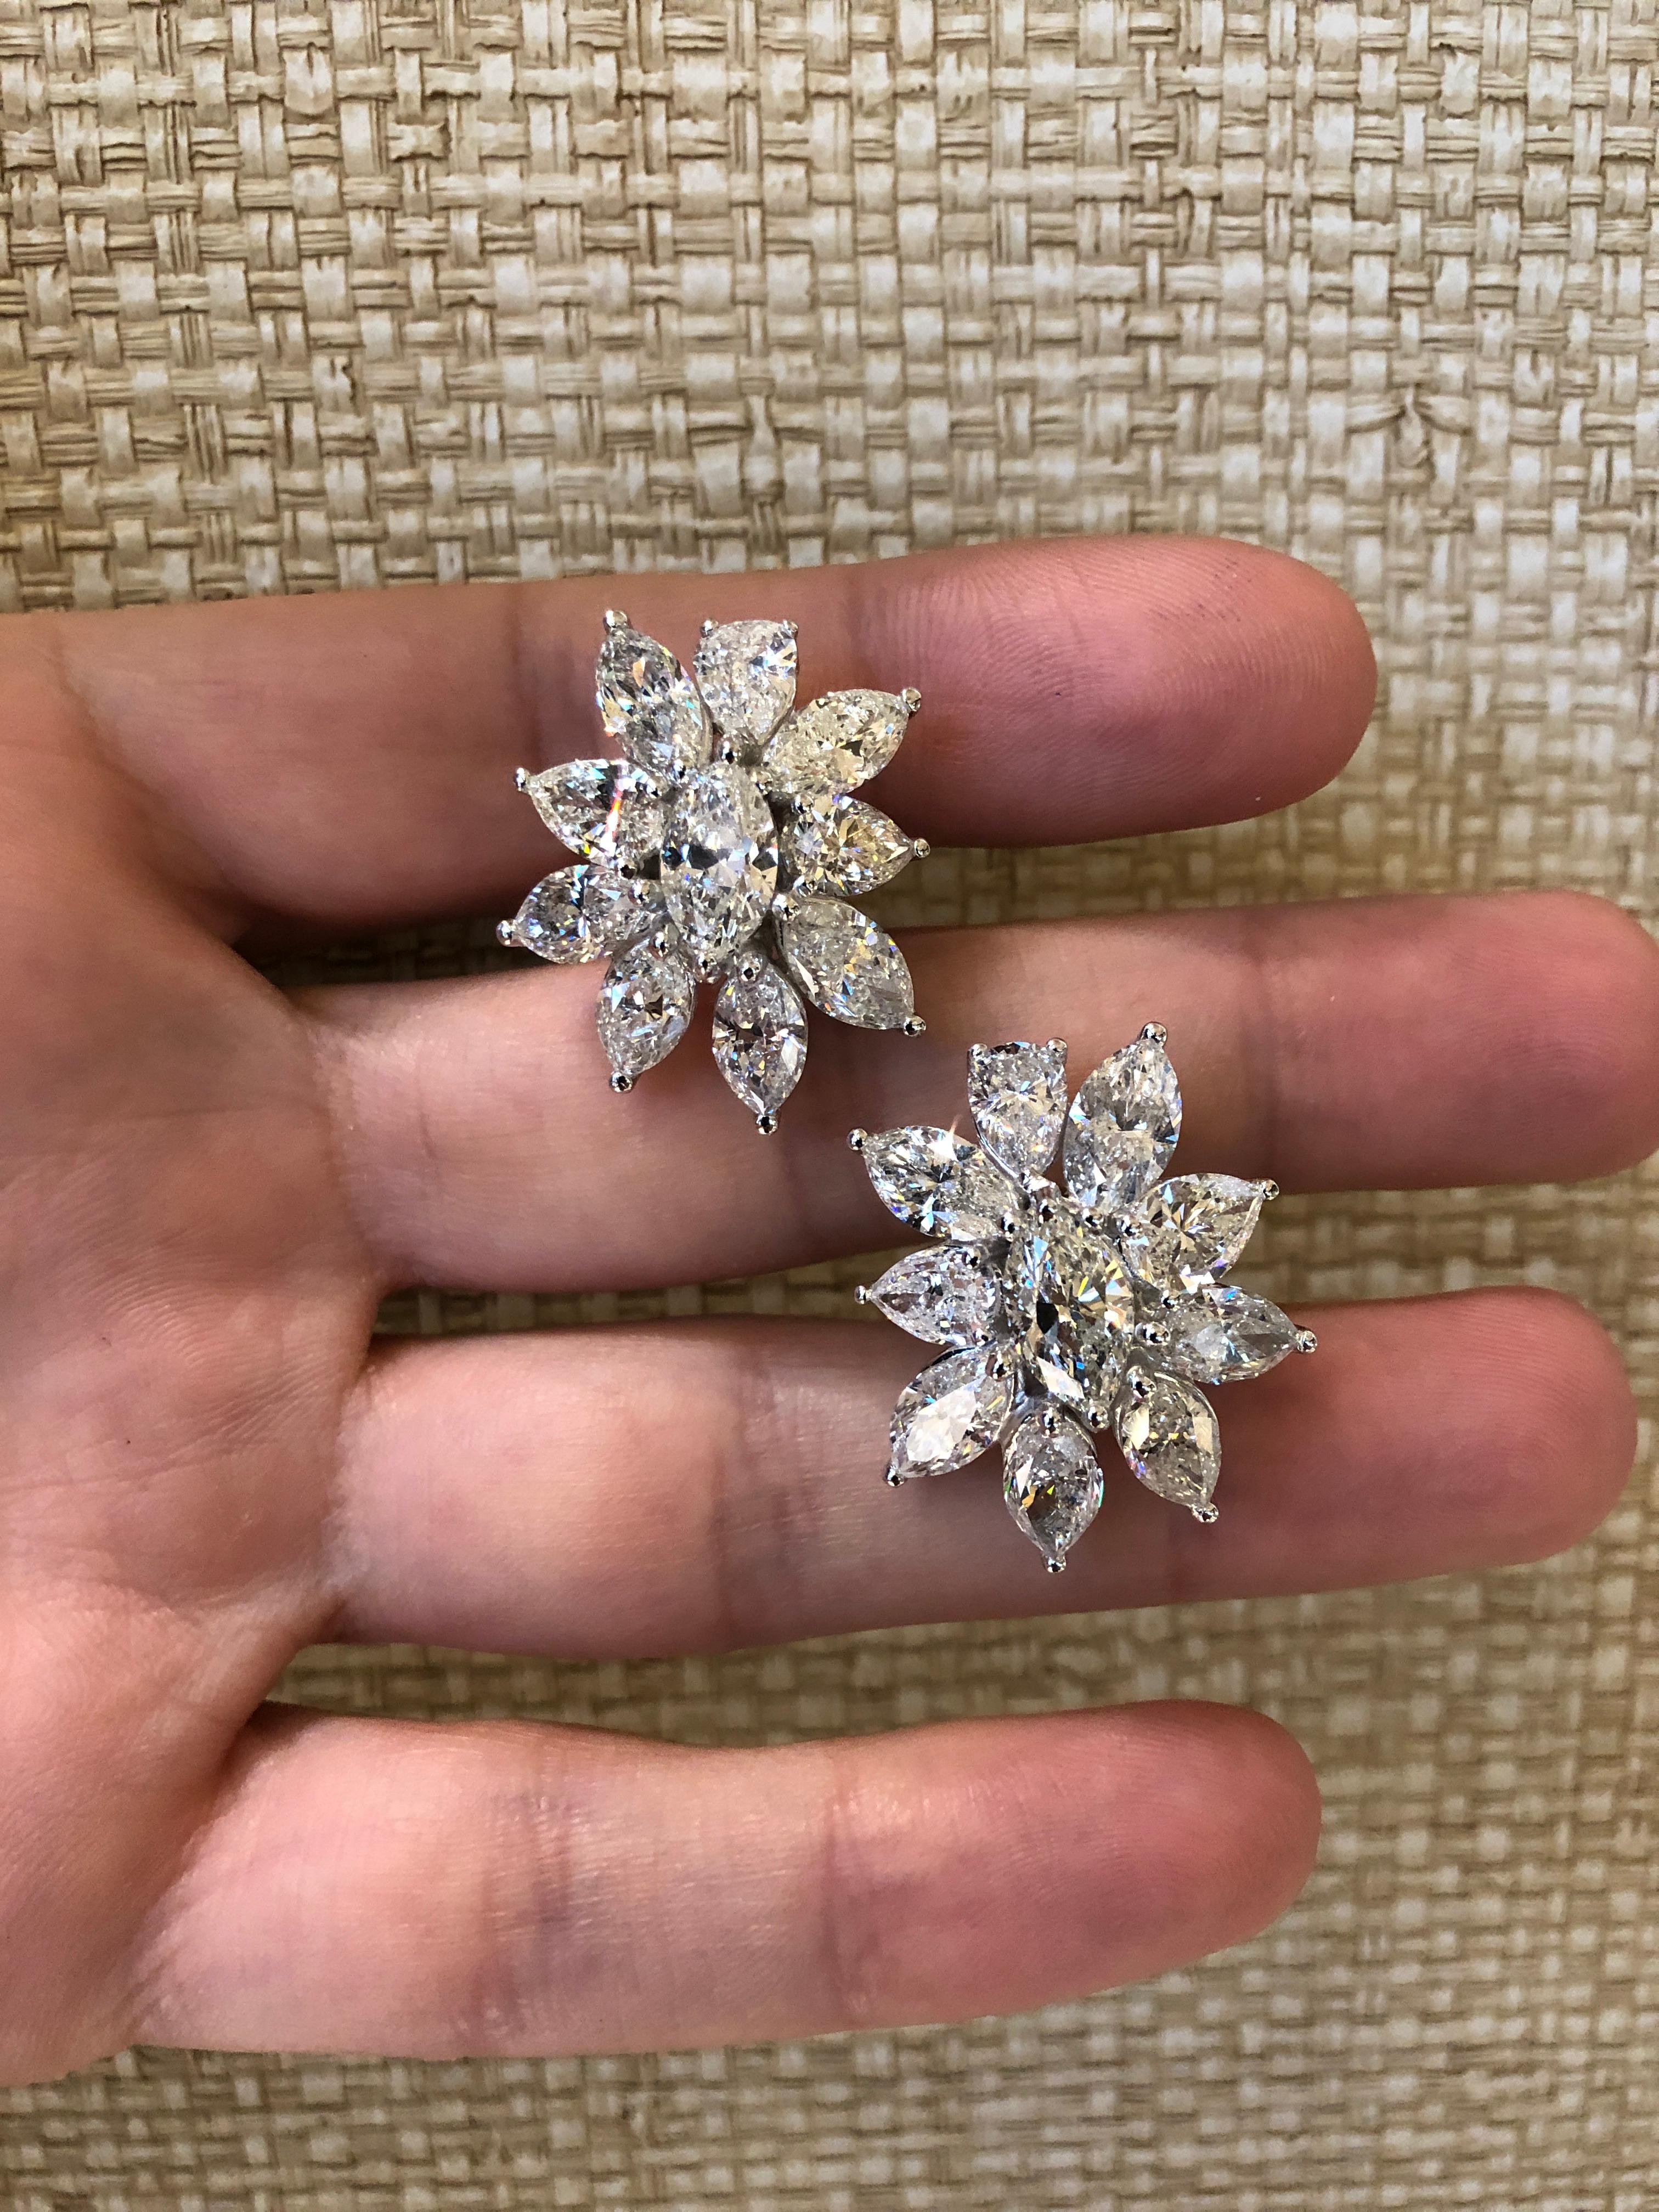 An important cluster earring.

21.49 carats of white marquise and pear shape diamonds set in 18k white gold. 

Each diamond averages over 1 carat

Approximately 1.10 inches long. 